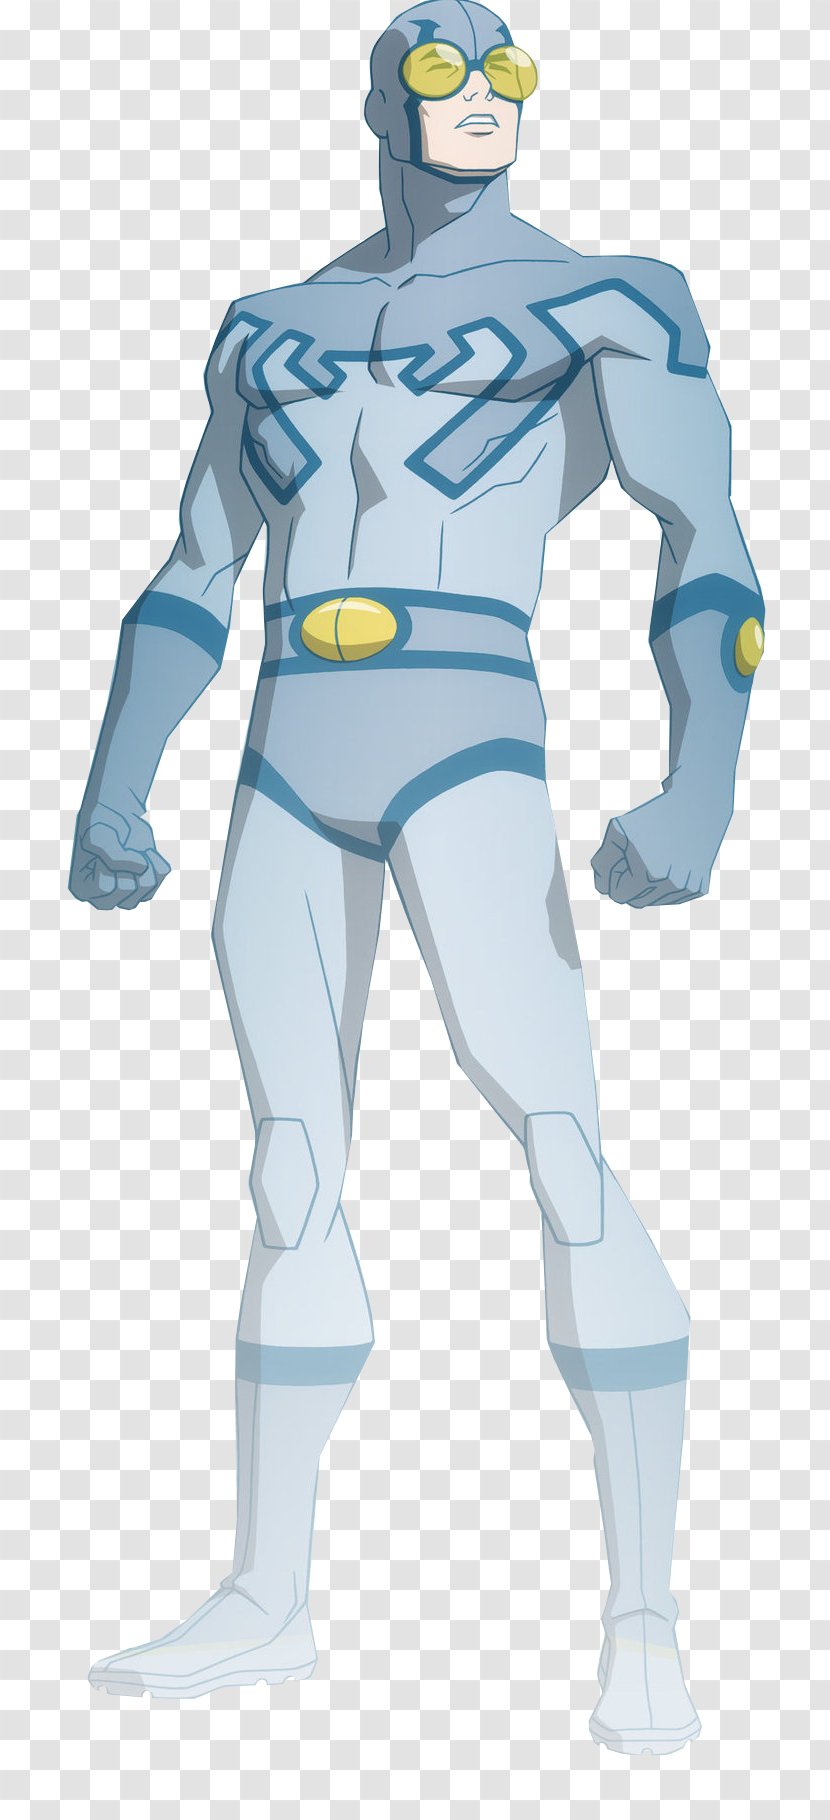 Ted Kord Blue Beetle Jaime Reyes Green Arrow Wally West - Justice League Transparent PNG